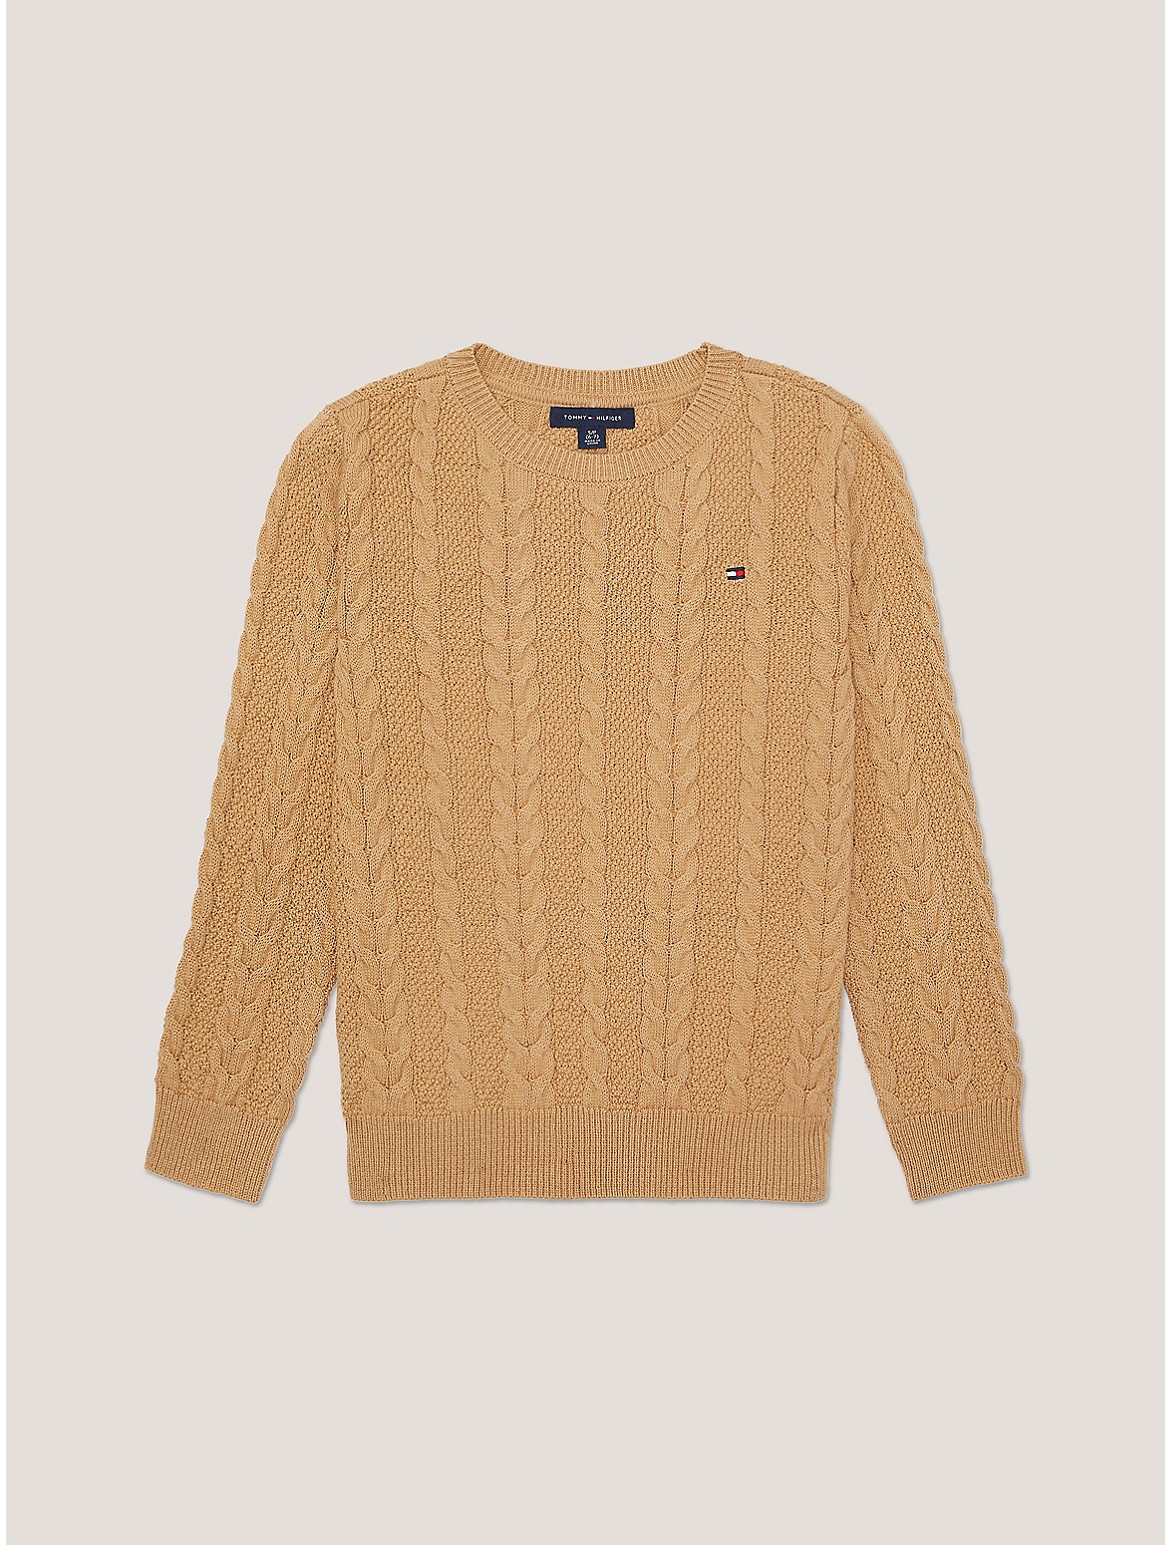 Tommy Hilfiger Boys' Kids' Cable Knit Sweater - Beige - M